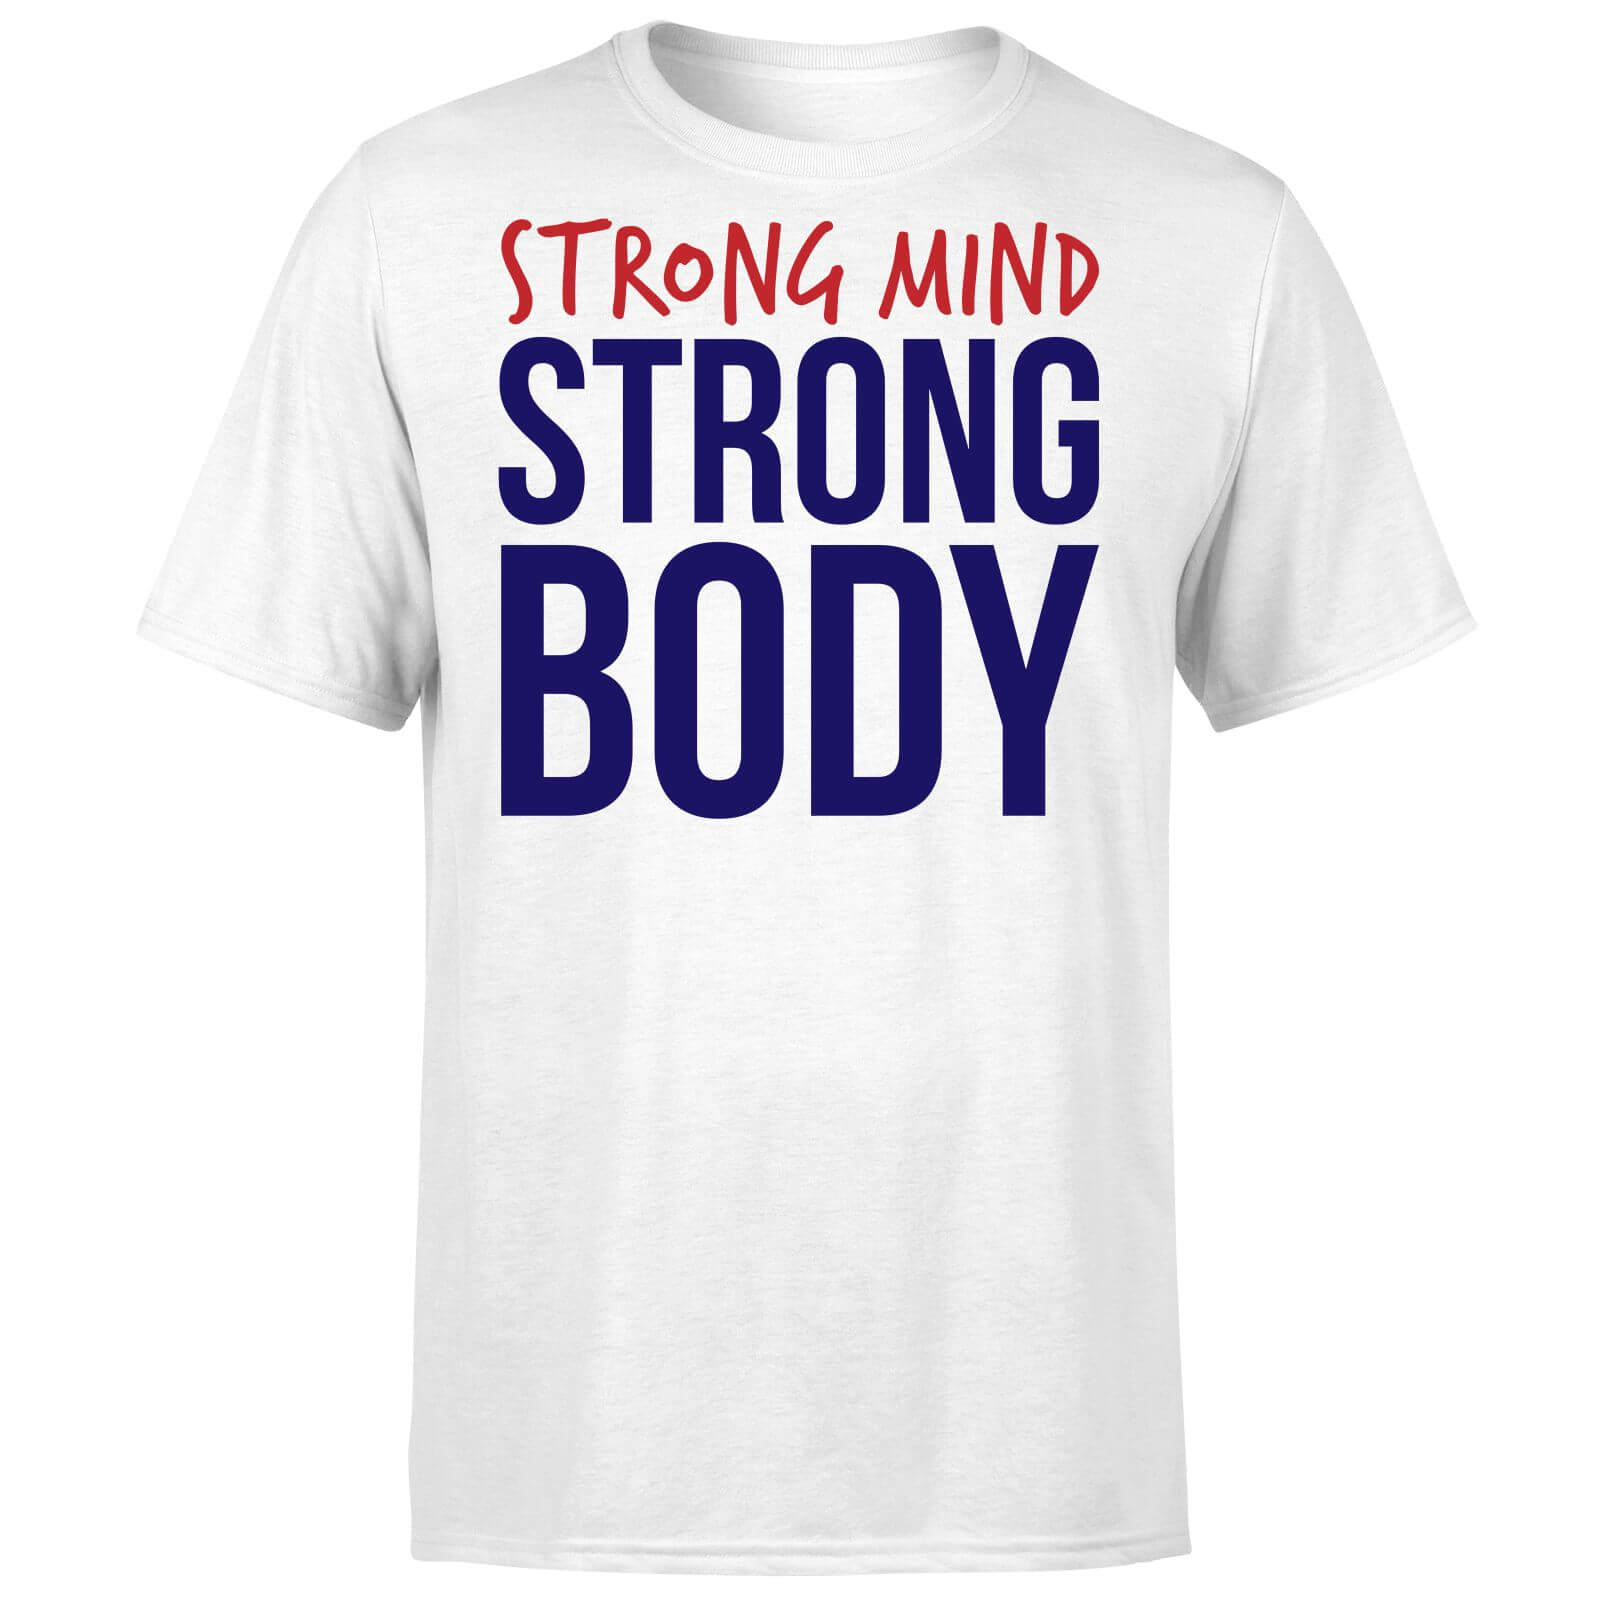 Strong Mind Strong Body T-Shirt - White - L - White